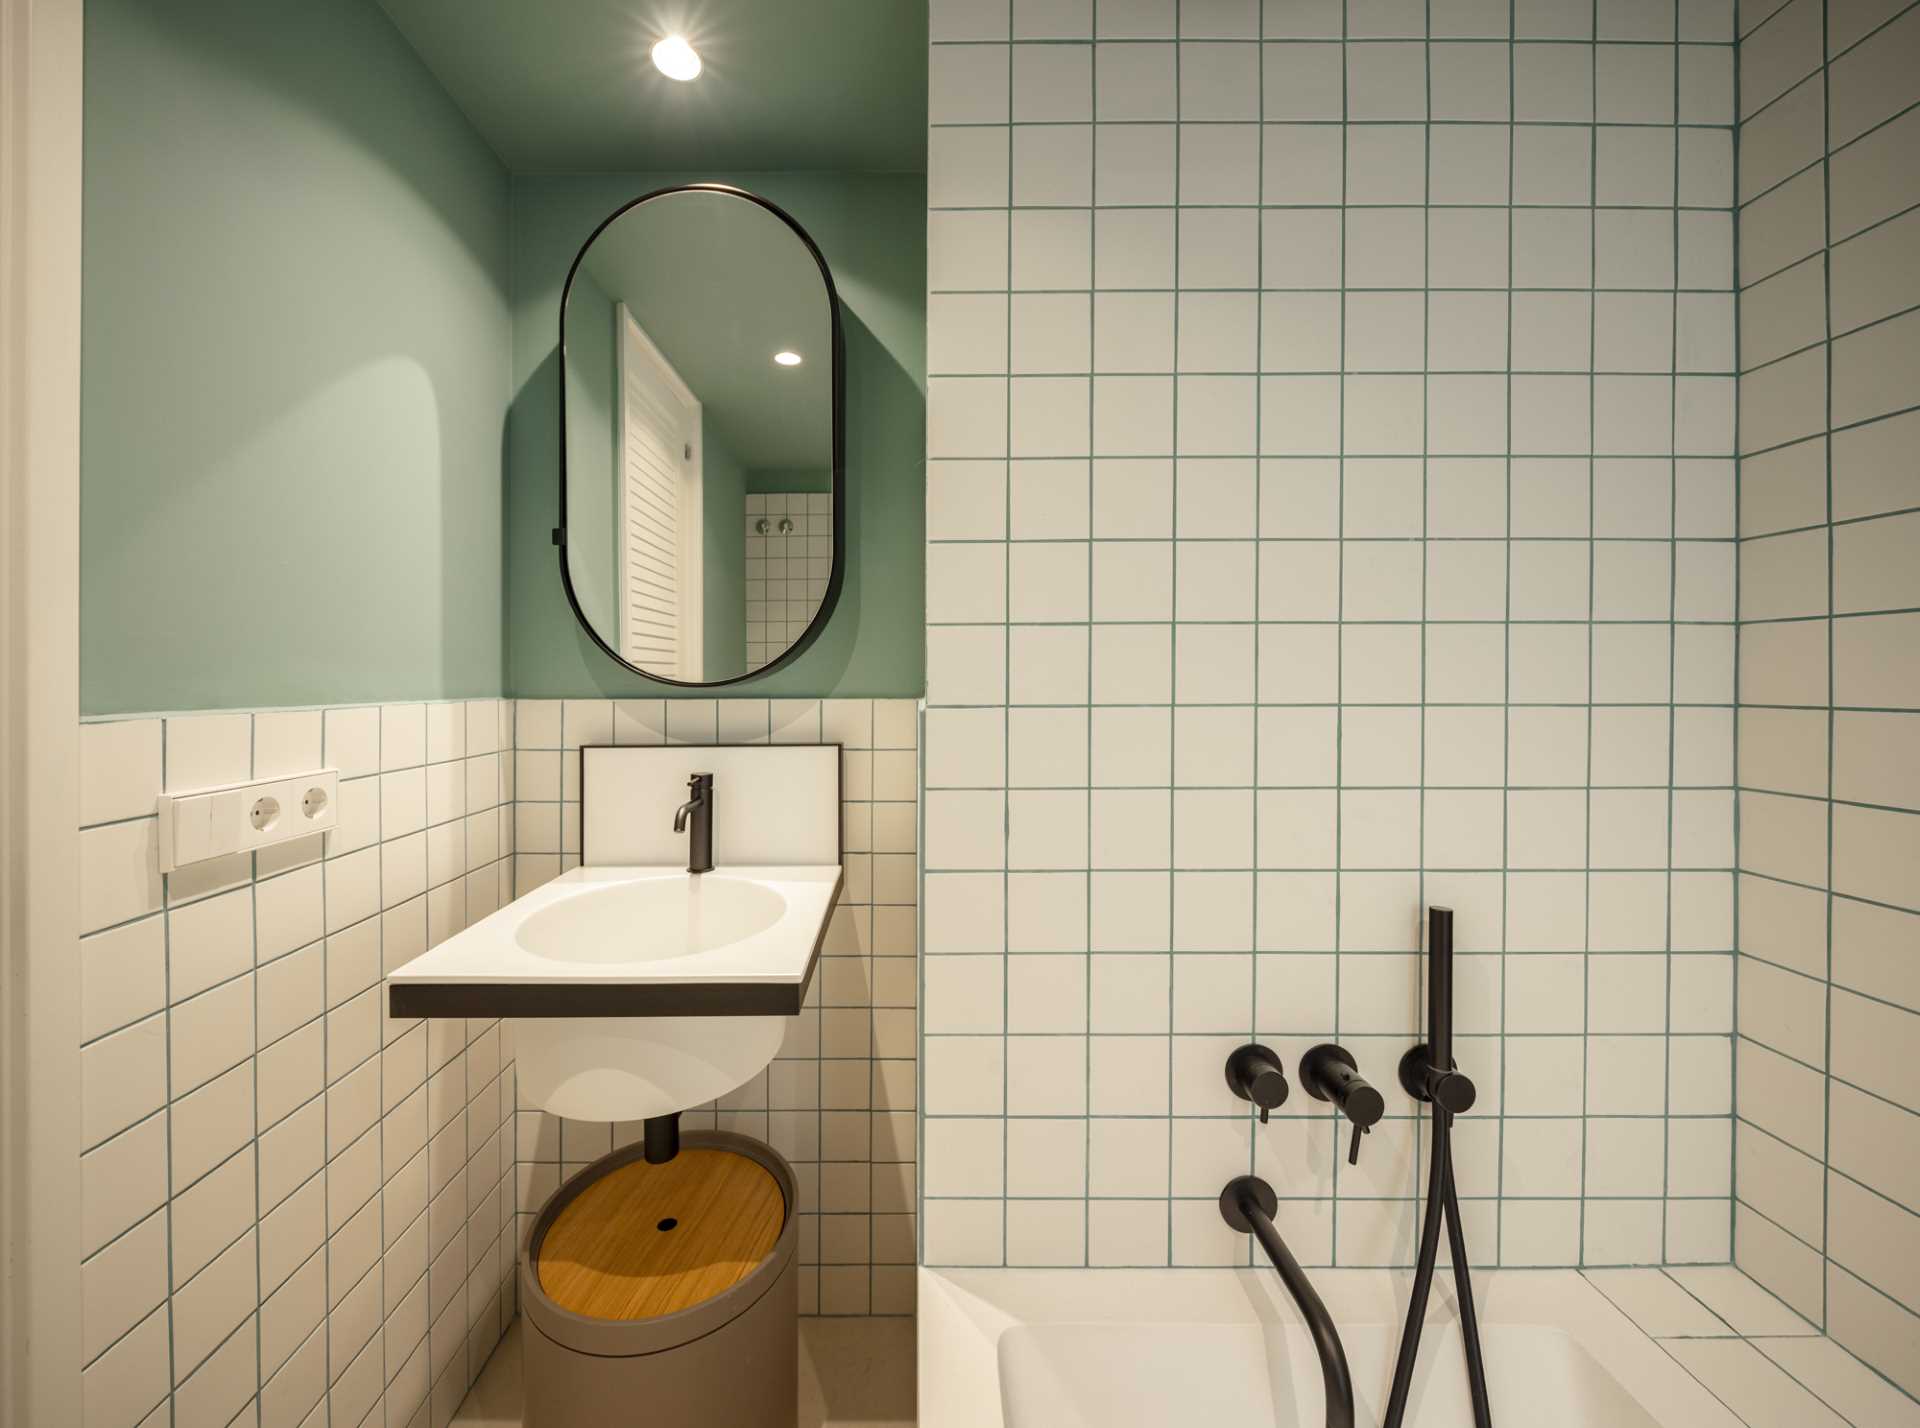 A modern bathroom includes square tiles with green grout that matches the walls, a small vanity, and a built-in bathtub.